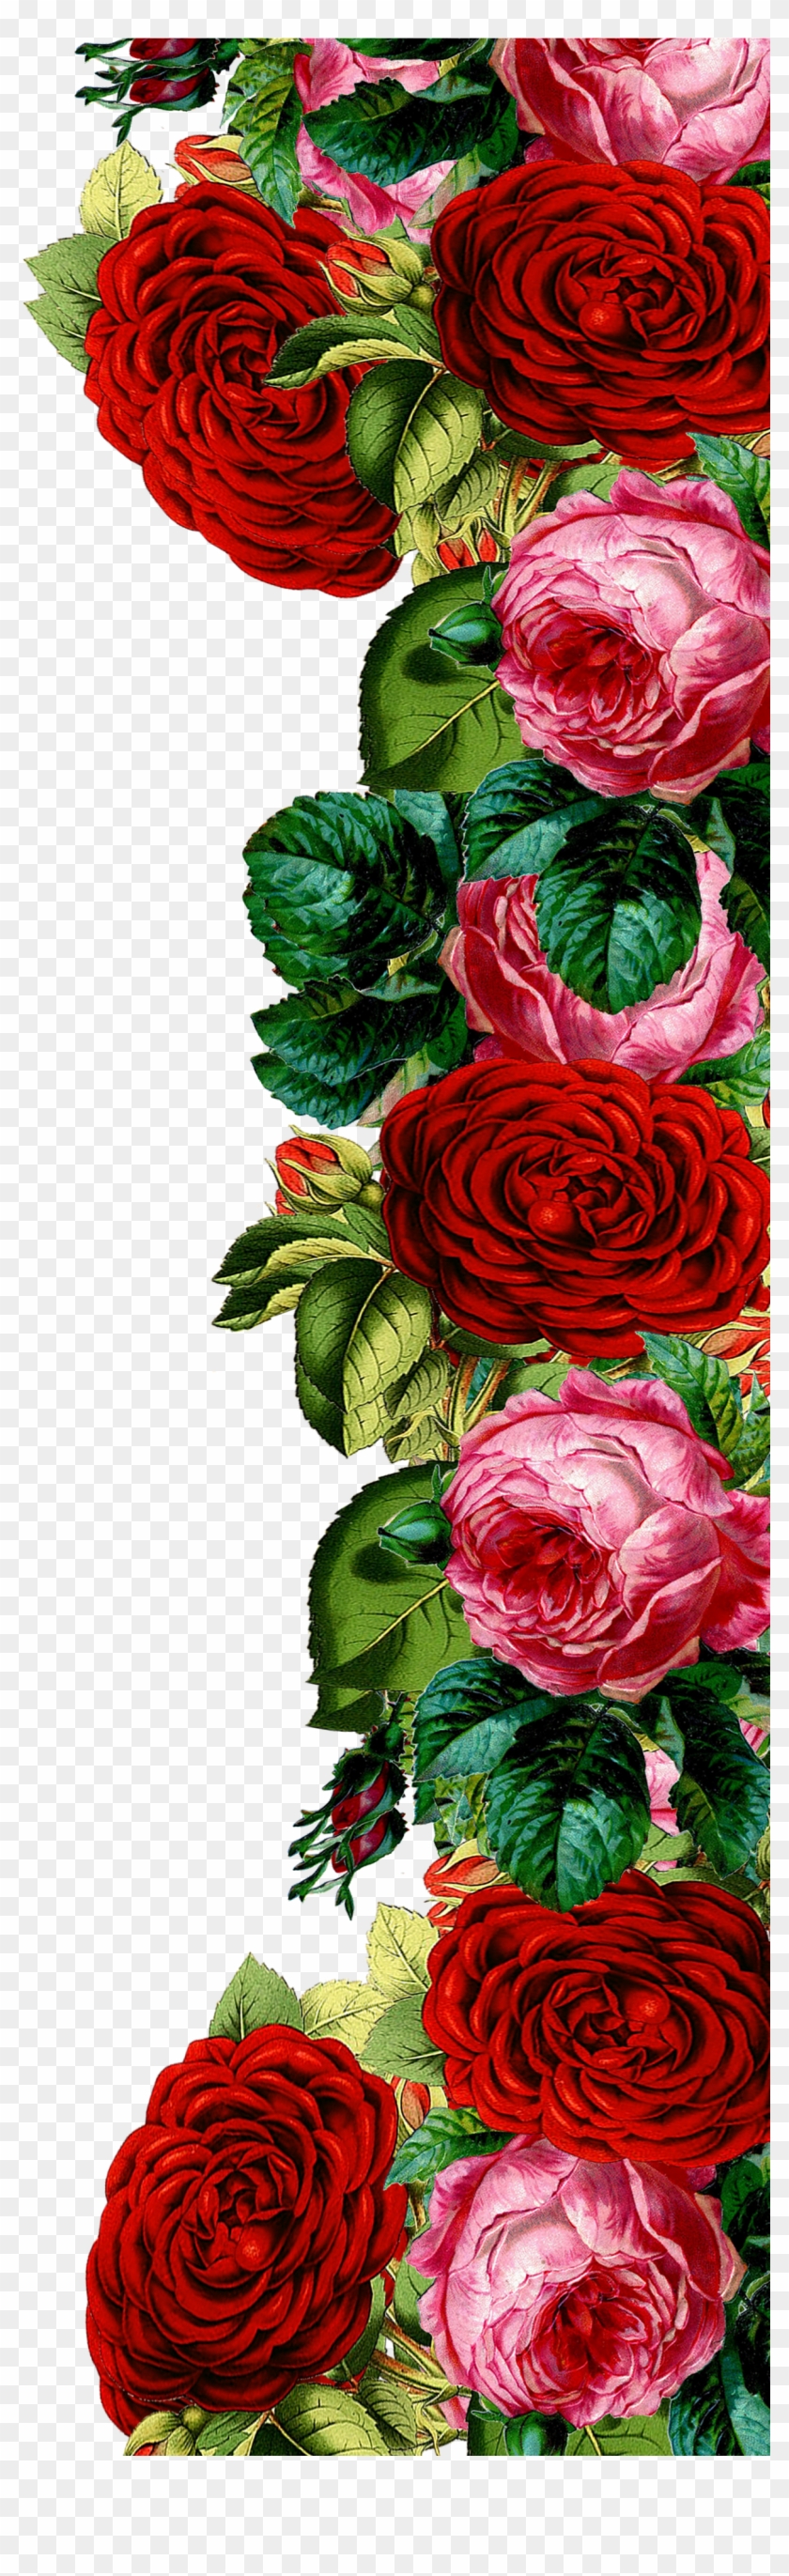 Watercolor Red Vintage Roses Border Png For Free - Vintage Red Roses Border Clipart #21814